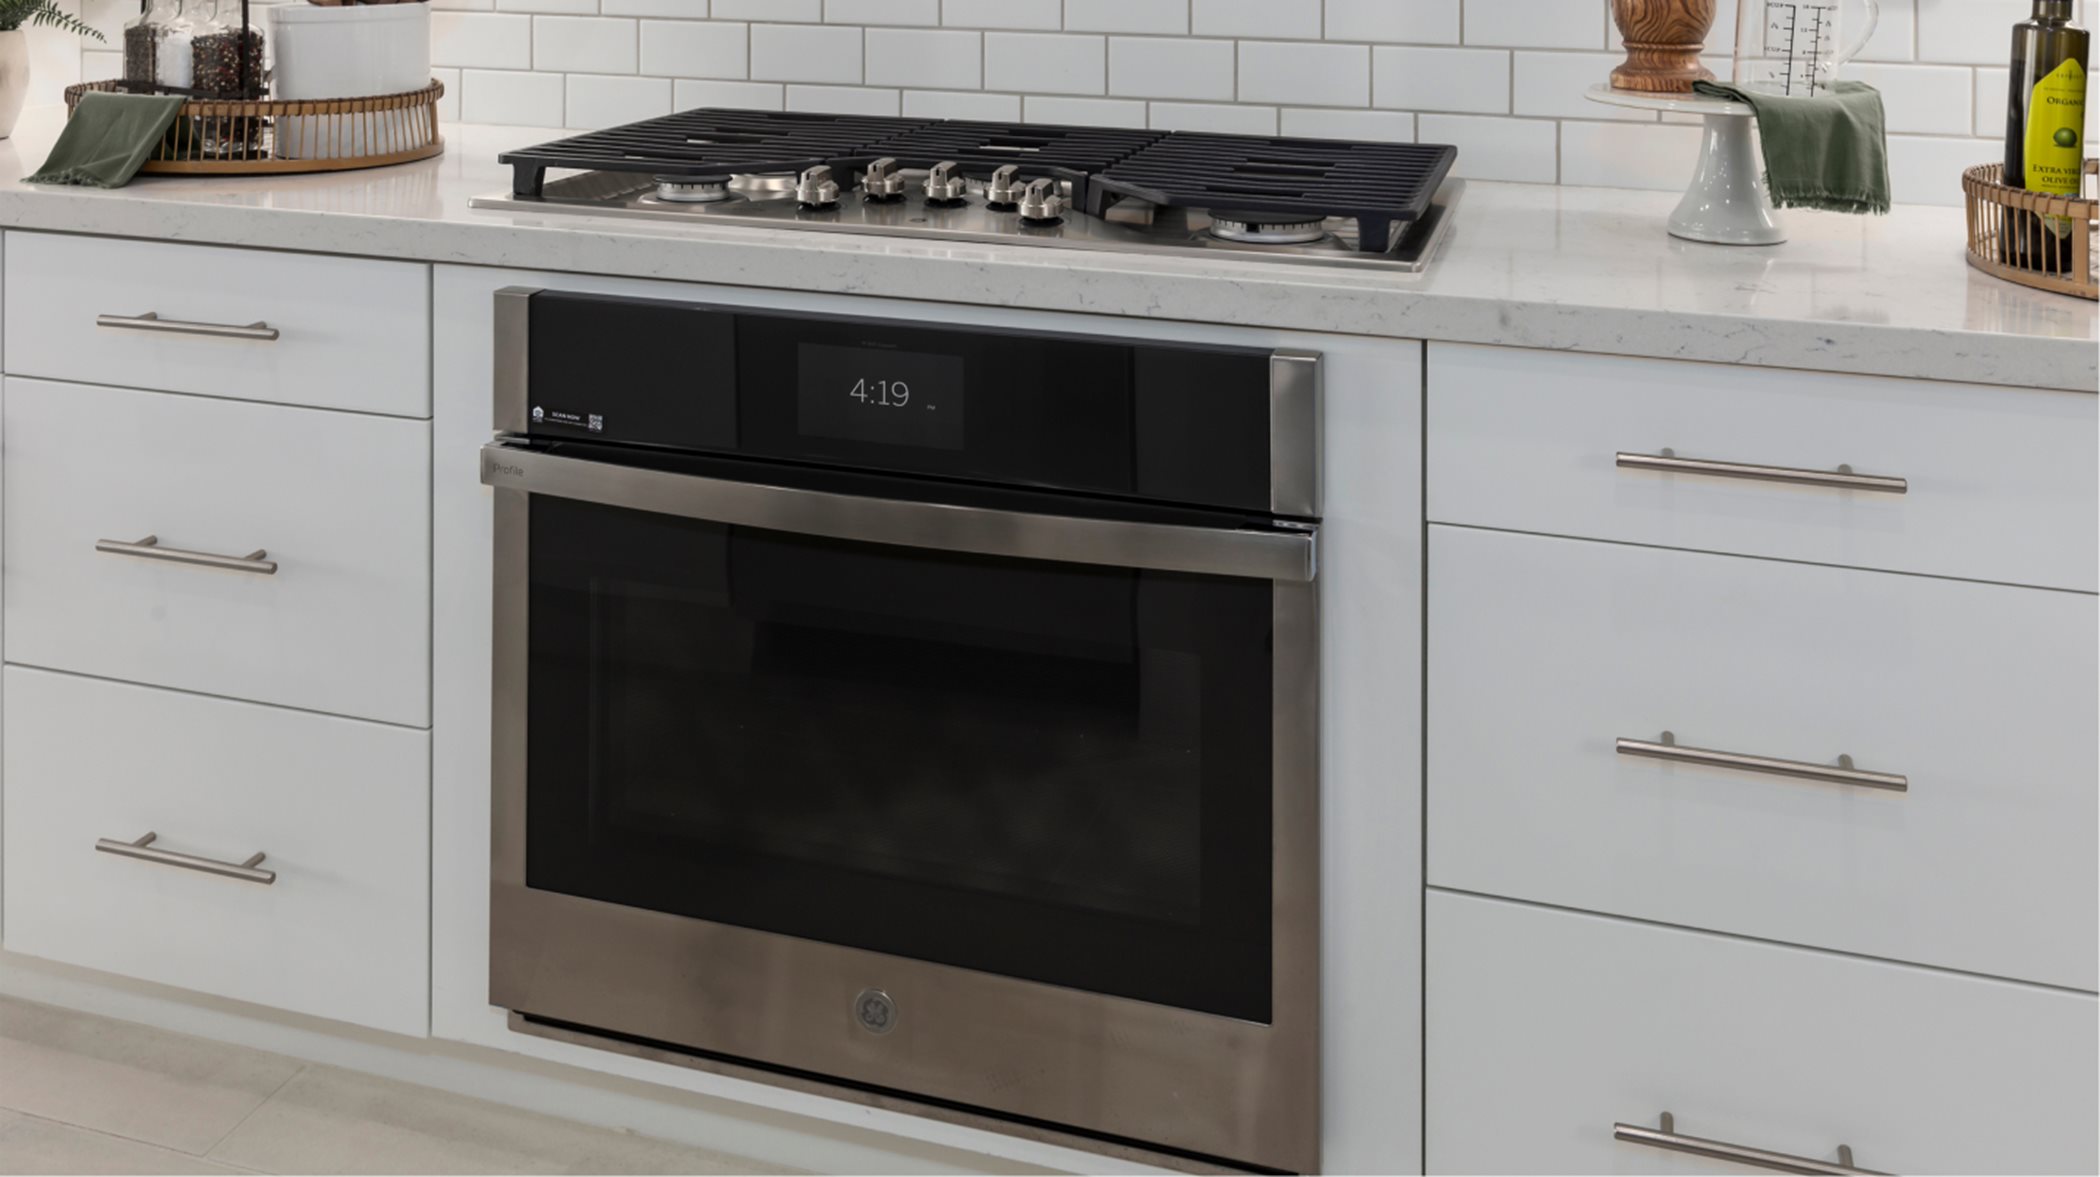 The Reserve Browns Valley stainless steel appliance oven